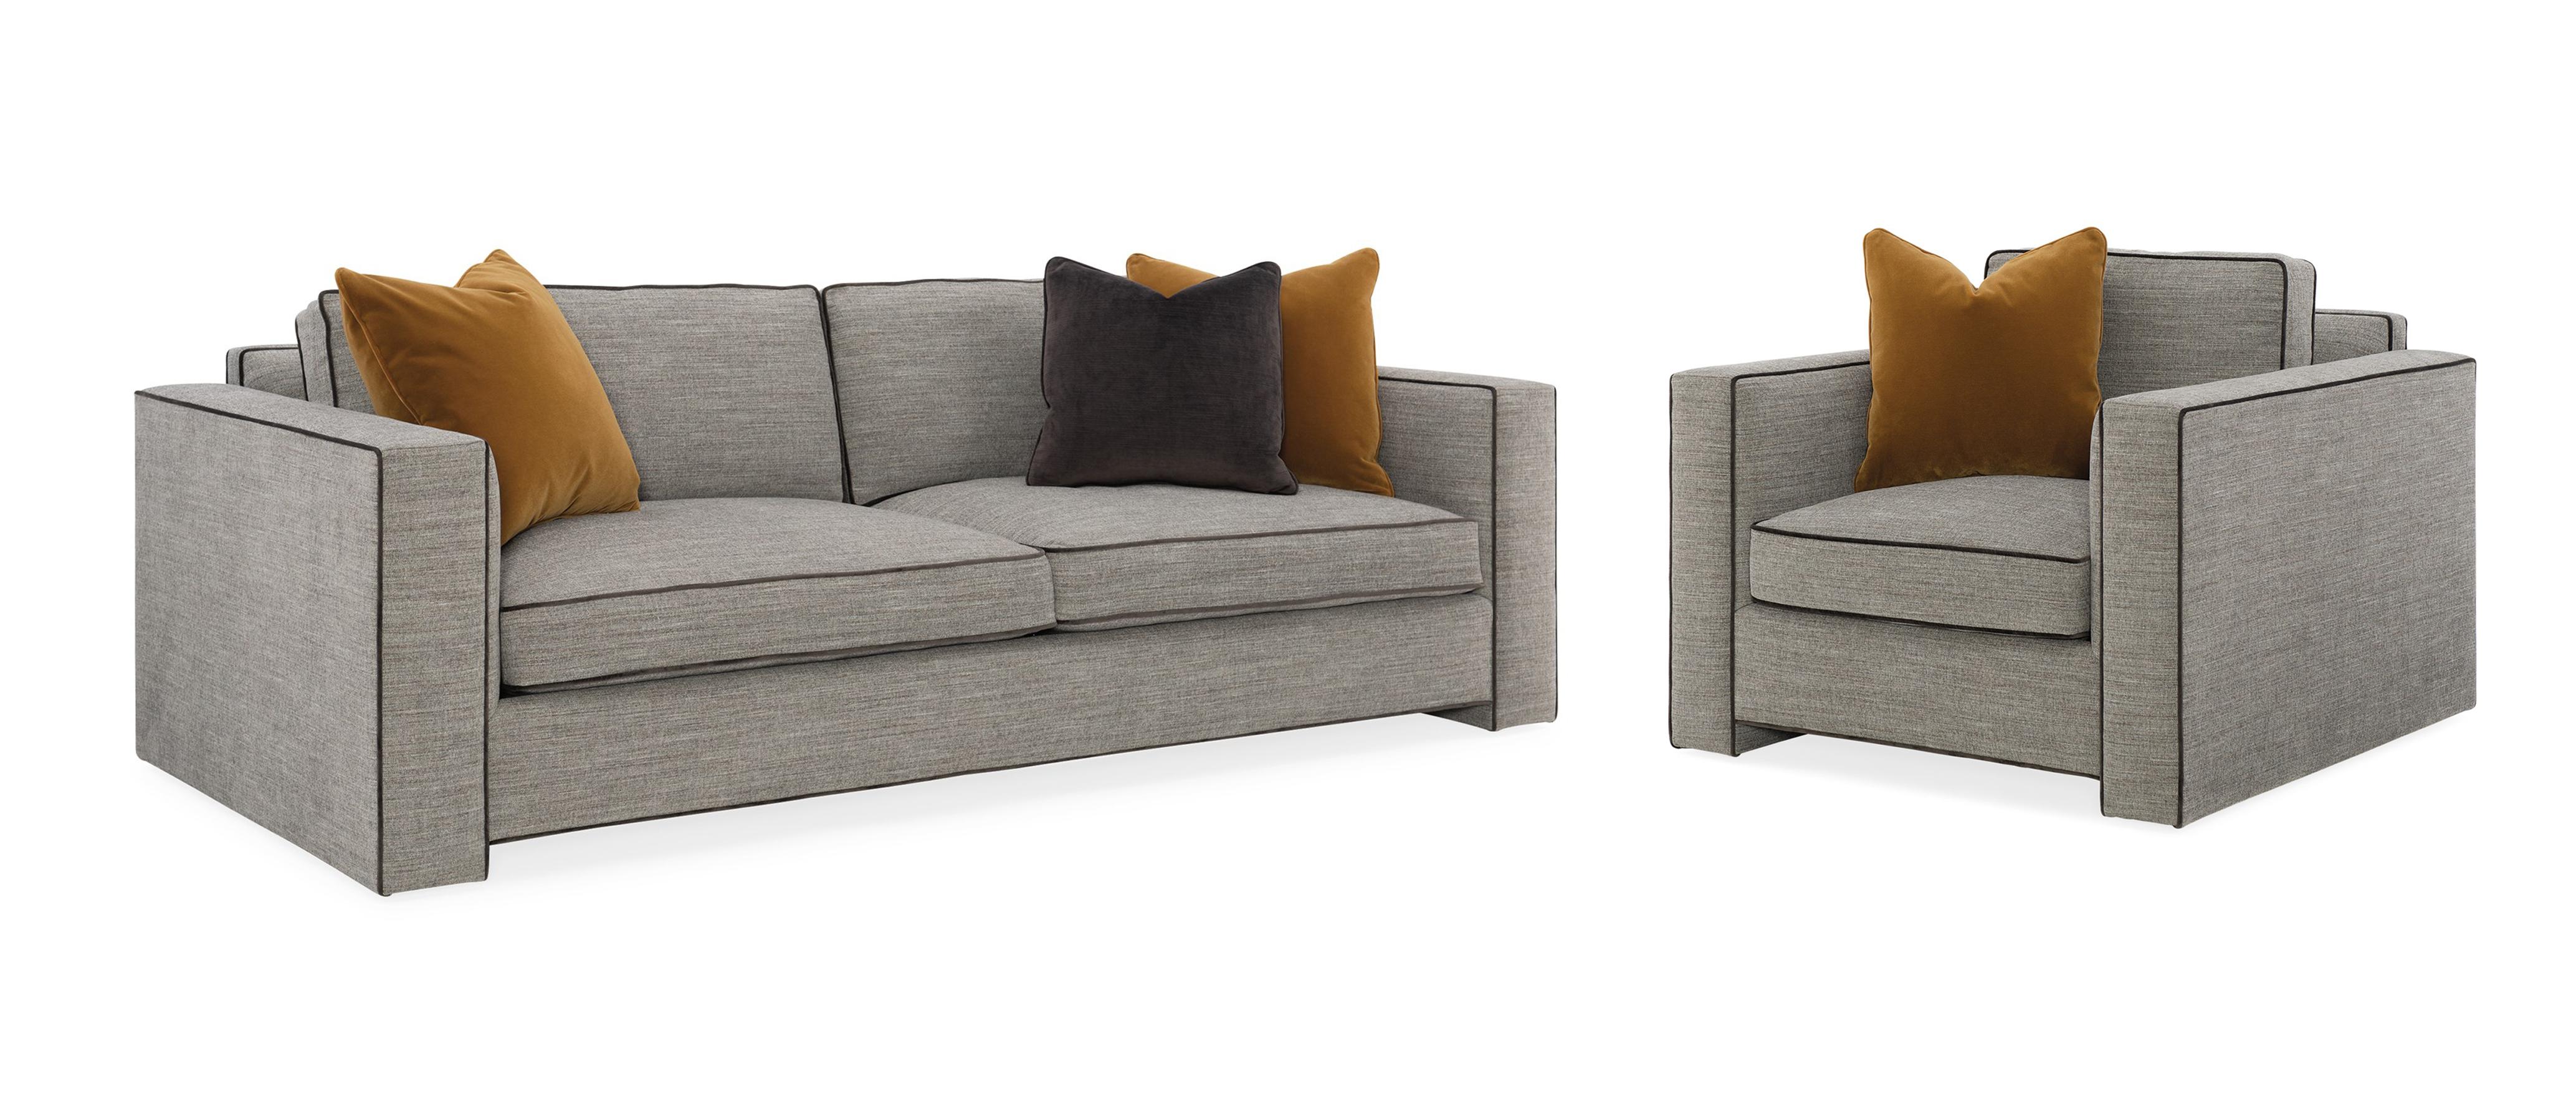 Contemporary Sofa Set WELT PLAYED UPH-019-016-A-2PC in Dark Gray Fabric